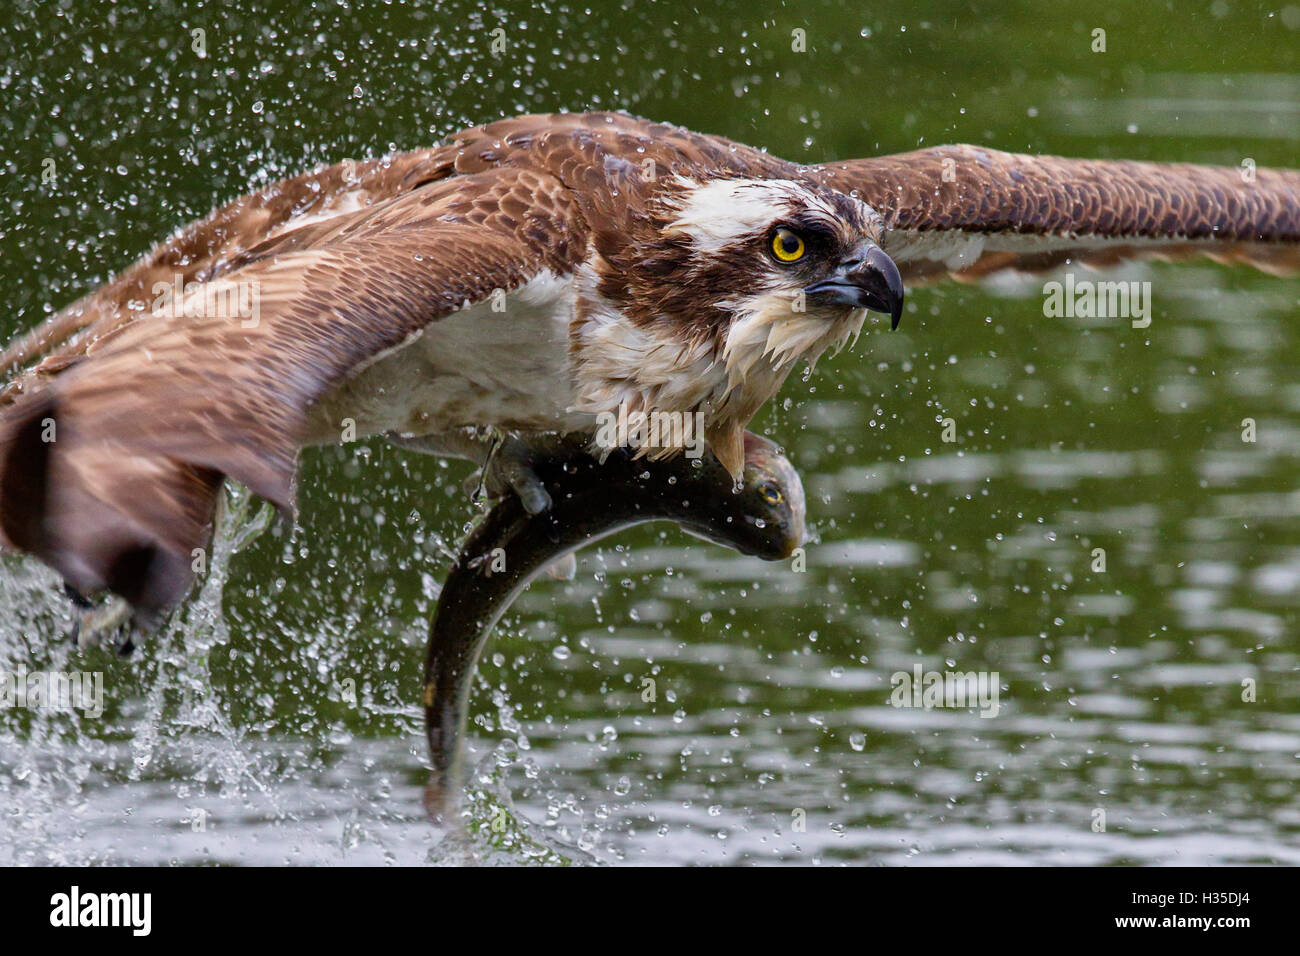 Osprey (Pandion haliaetus) flying low above the water with a freshly caught fish in its grasp, Pirkanmaa, Finland Stock Photo